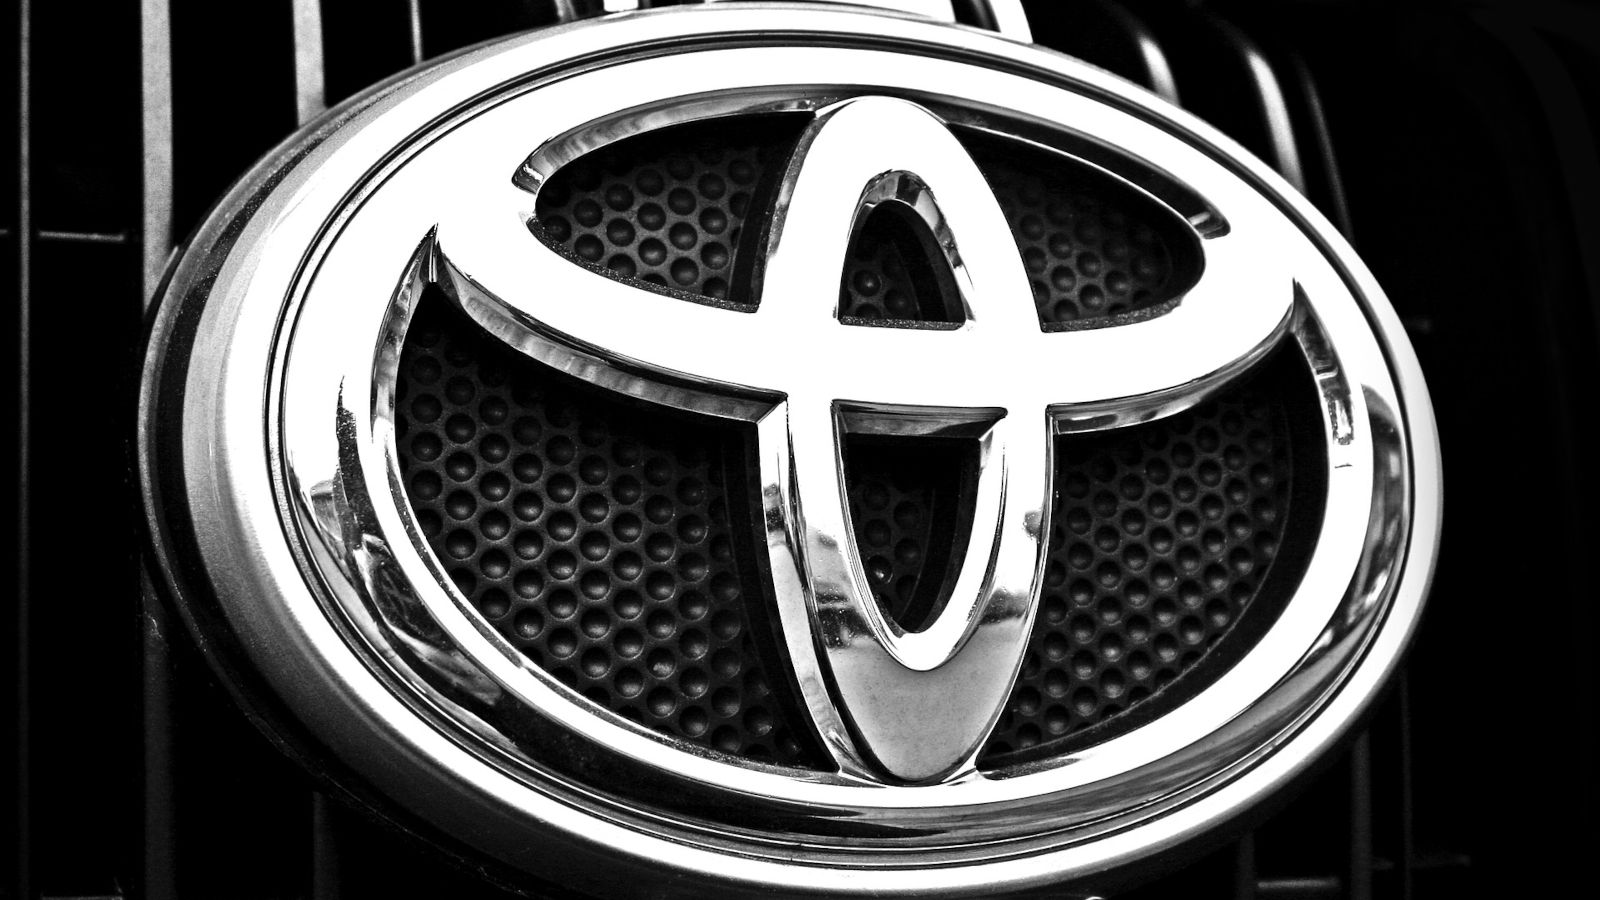 Toyota halts manufacturing after reported cyberattack on provider